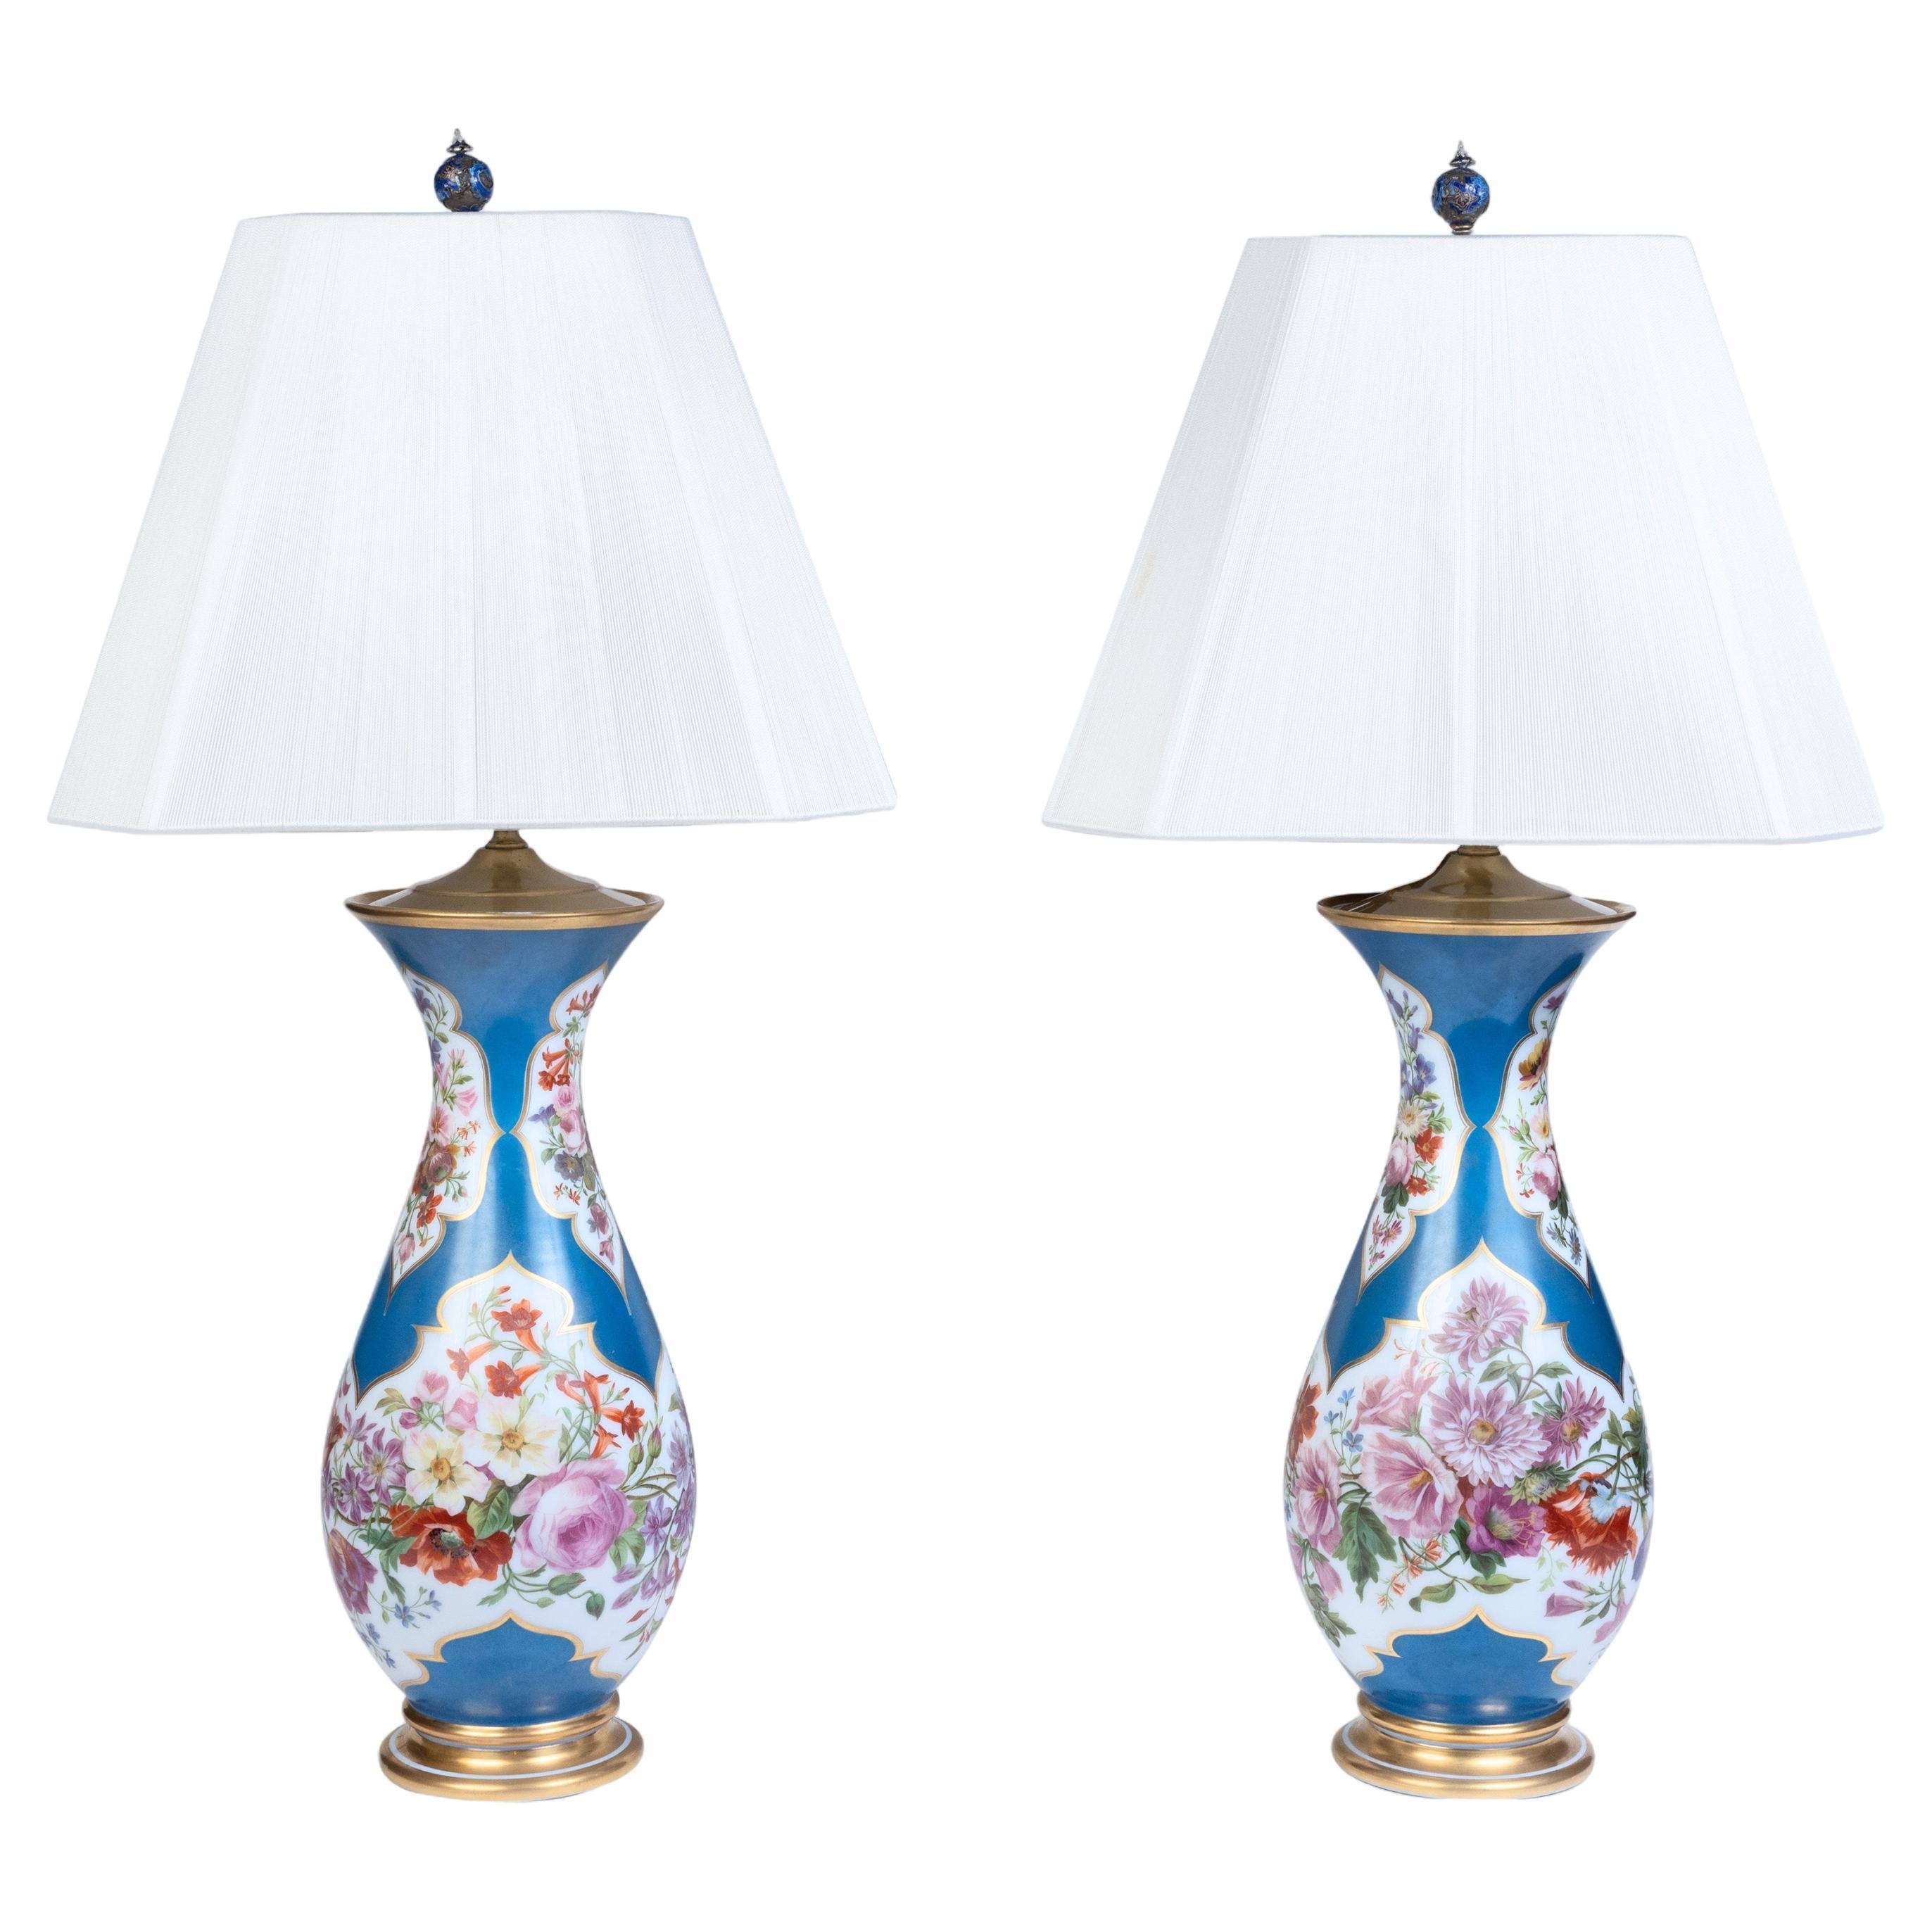 A Large Pair of French Baccarat Opaline Glass Vases / Lamps, 19th Century For Sale